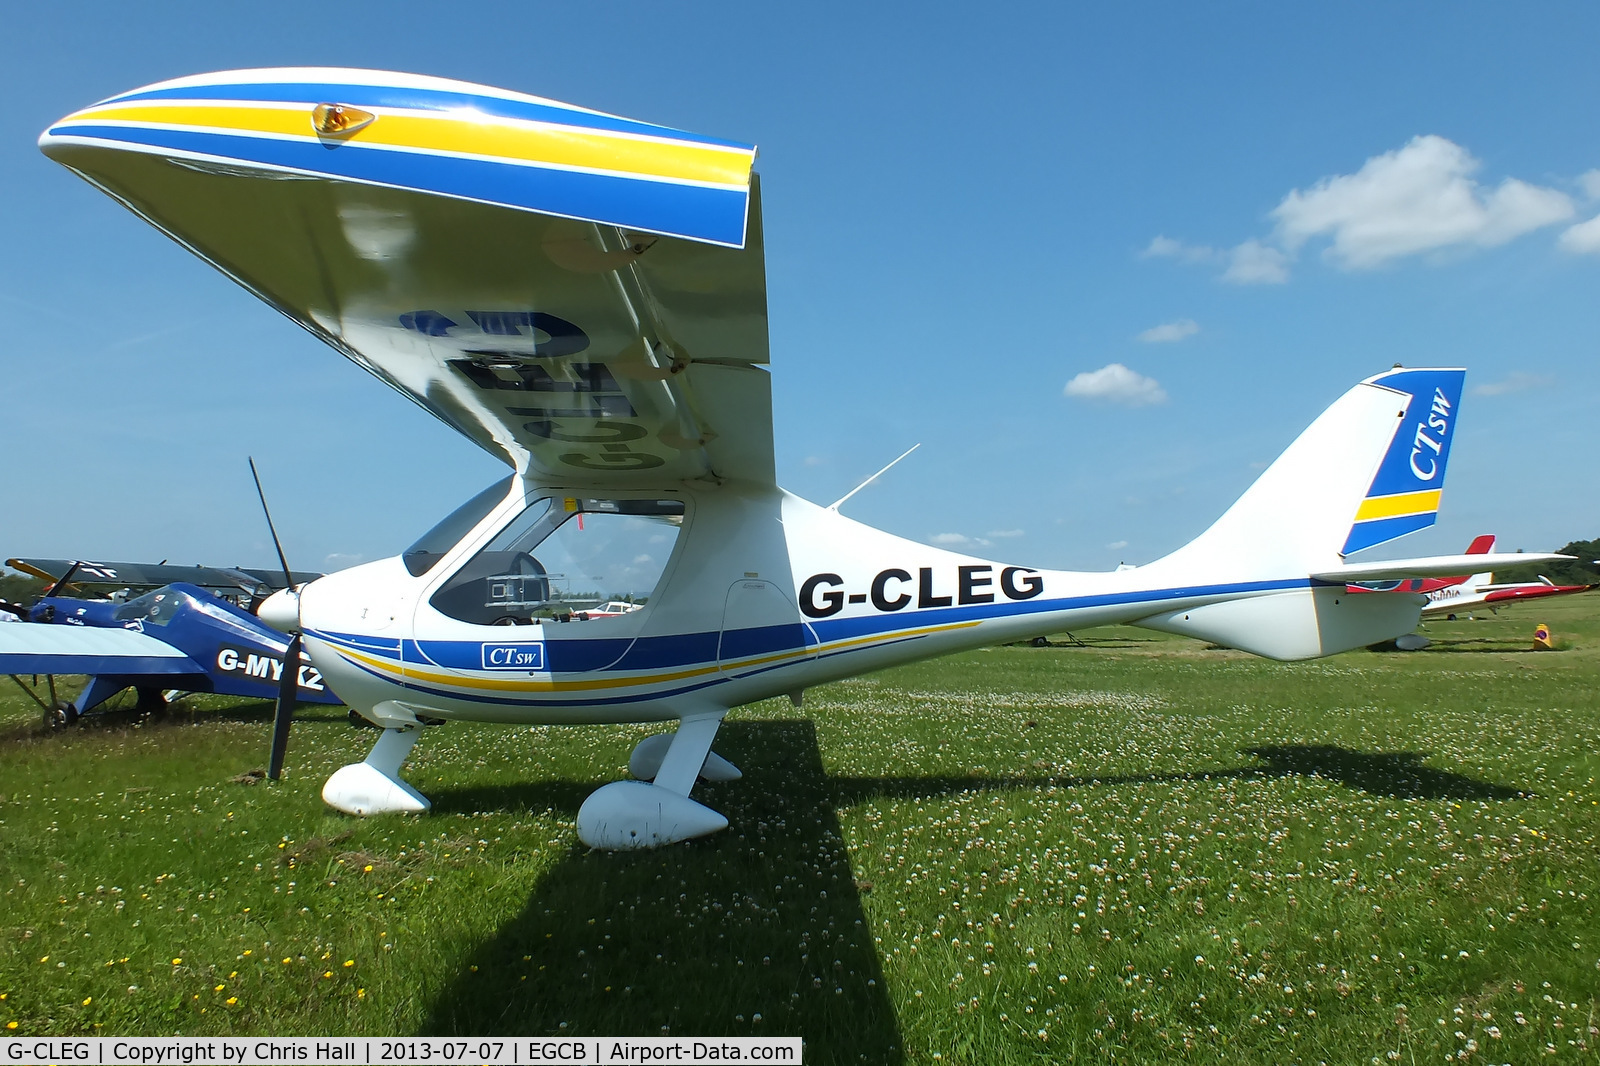 G-CLEG, 2007 Flight Design CTSW C/N 8269, at the Barton open day and fly in